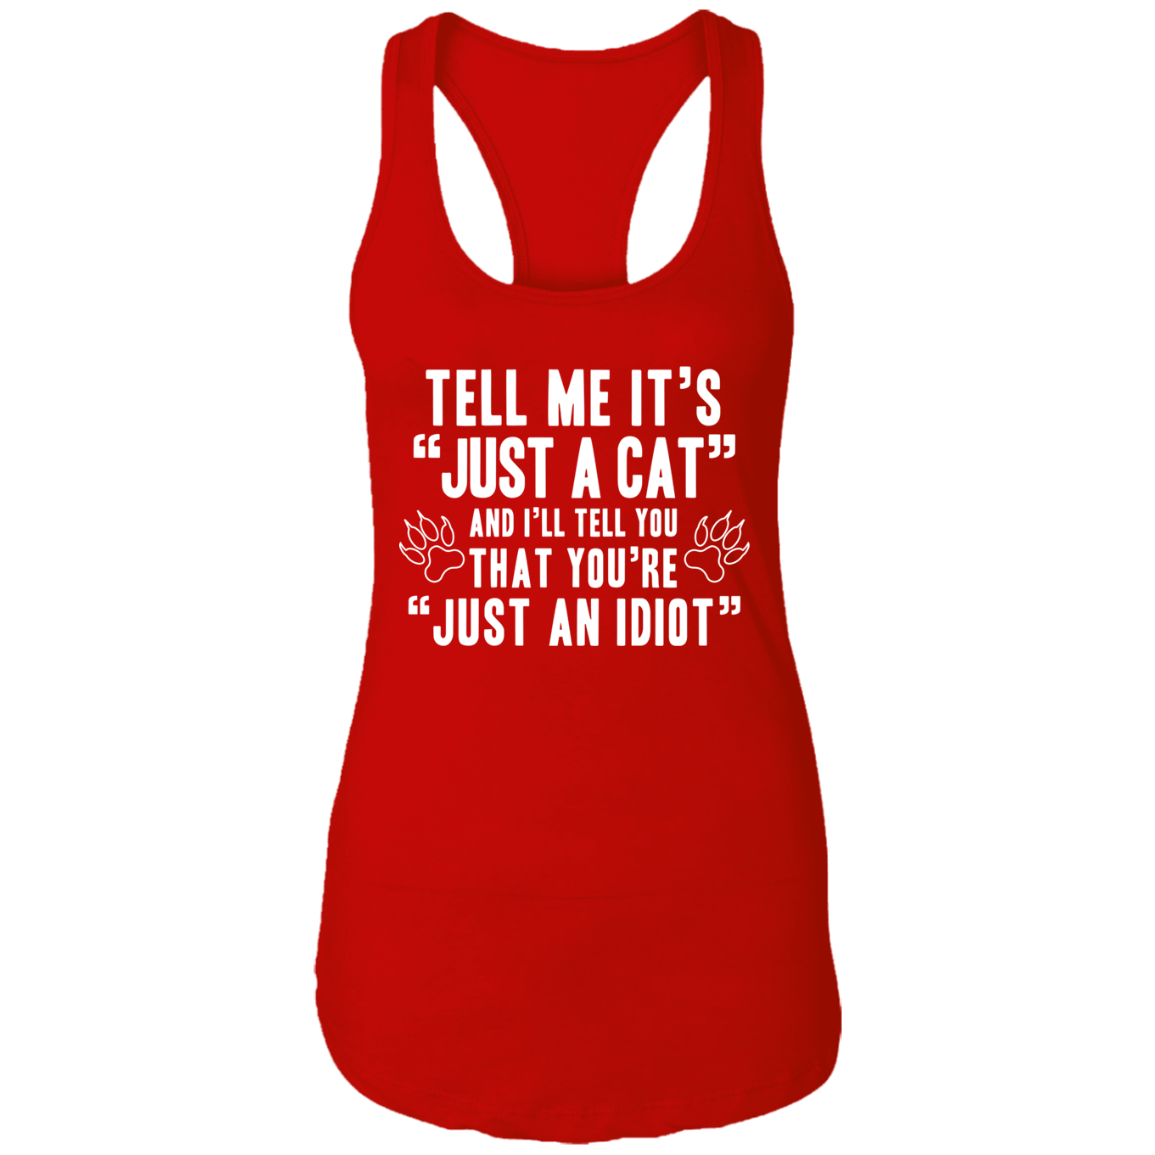 Tell Me It's Just A Cat - Ladies Racer Back Tank.